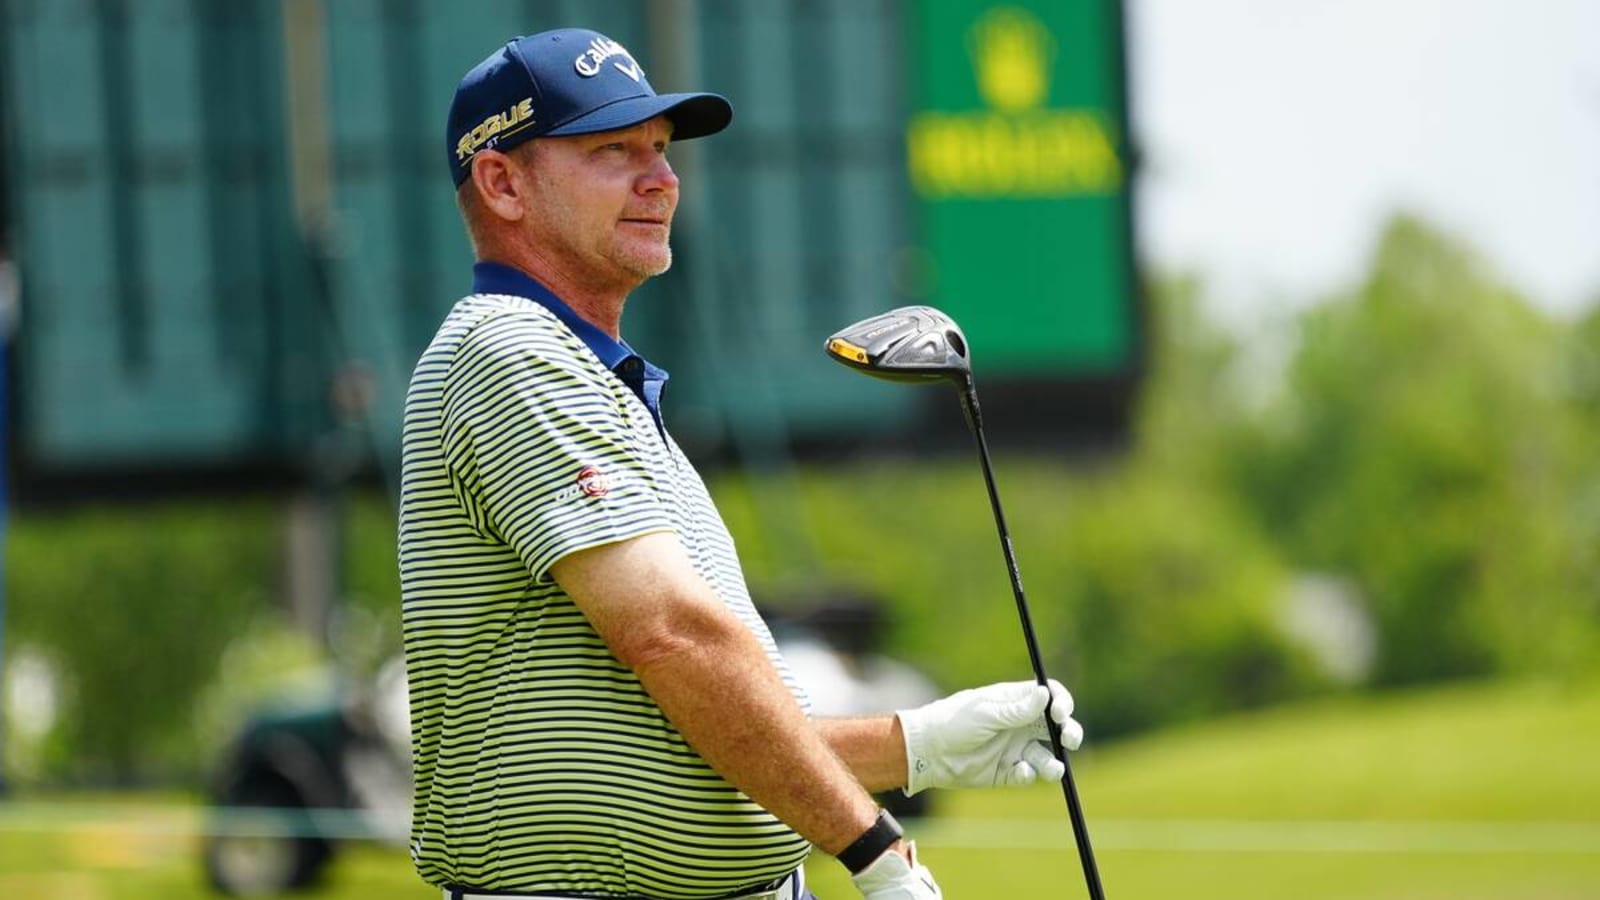 Tommy Gainey at the Wells Fargo Championship Live: TV Channel & Streaming Online